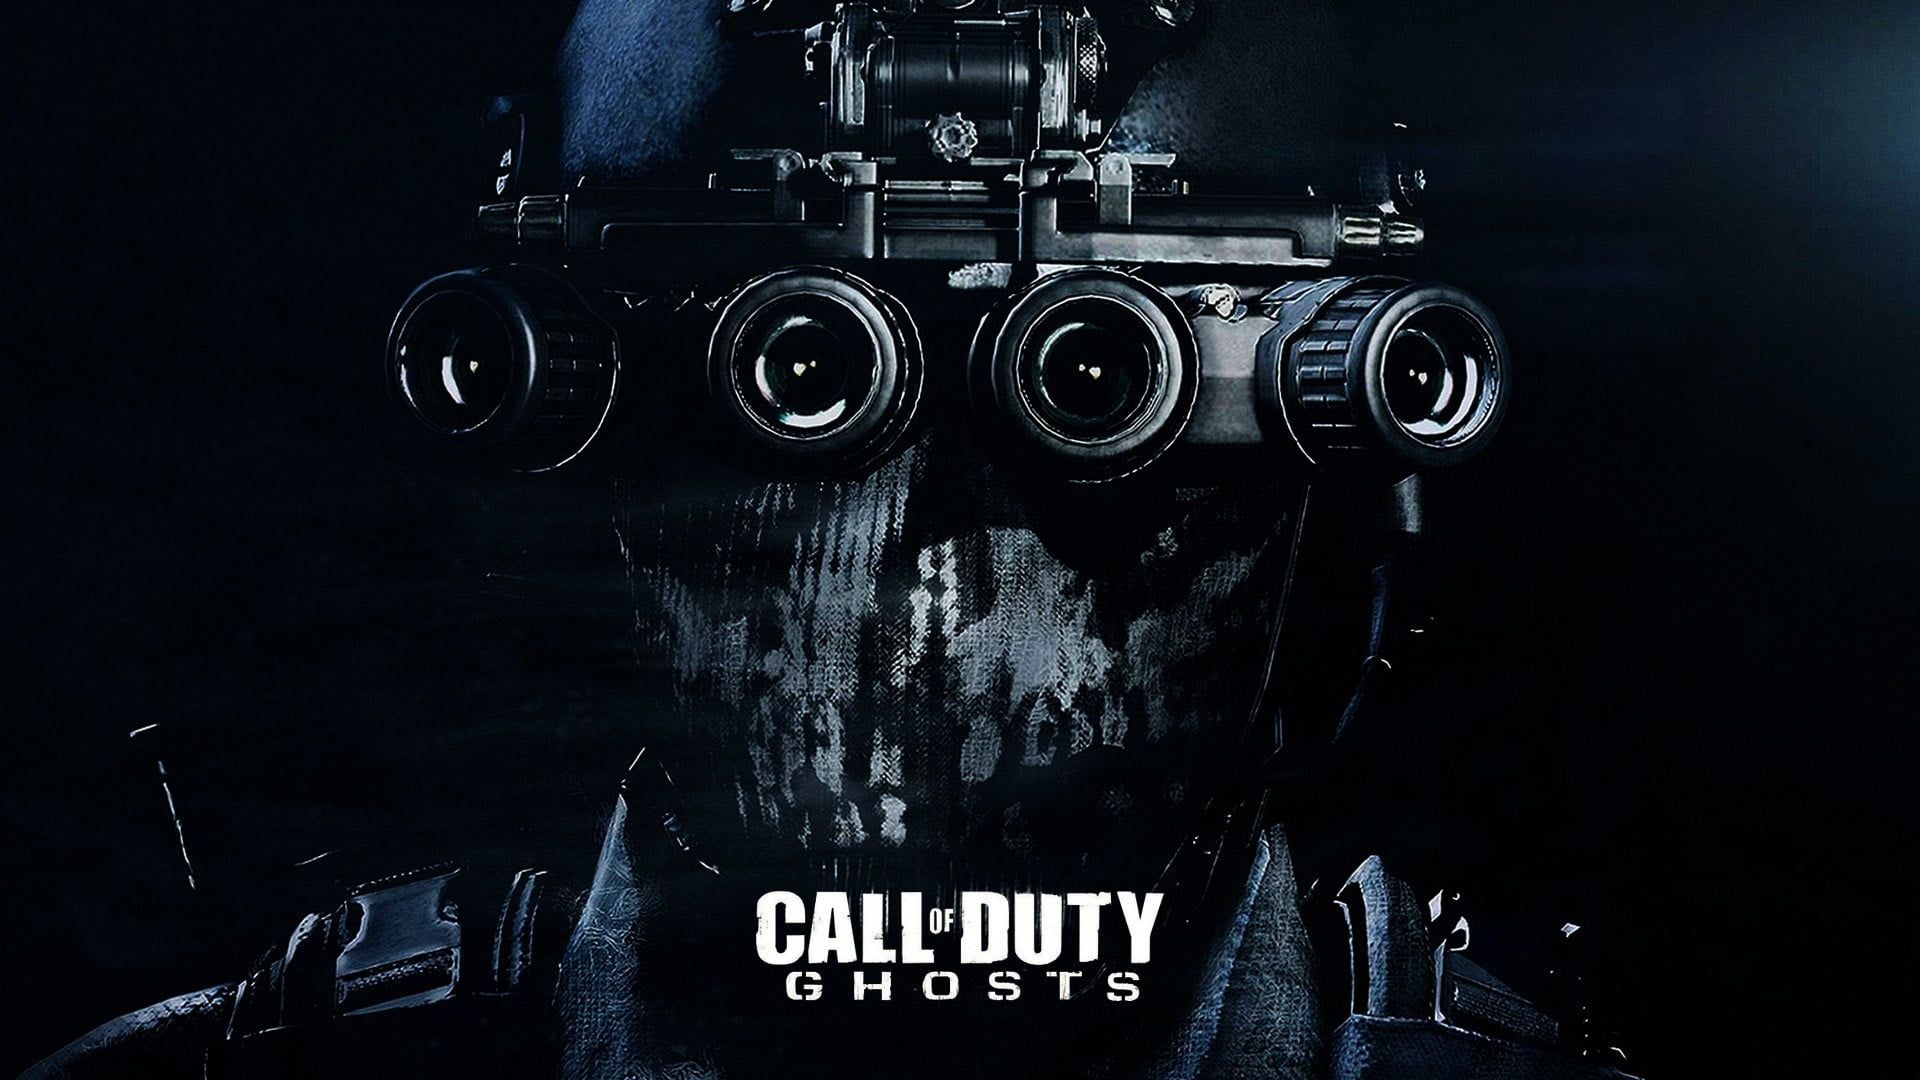 Call of Duty Ghost digital wallpaper Call of Duty: Ghosts Call of Duty video games P #wallpaper #hdwall. Call of duty ghosts, Call of duty, Digital wallpaper